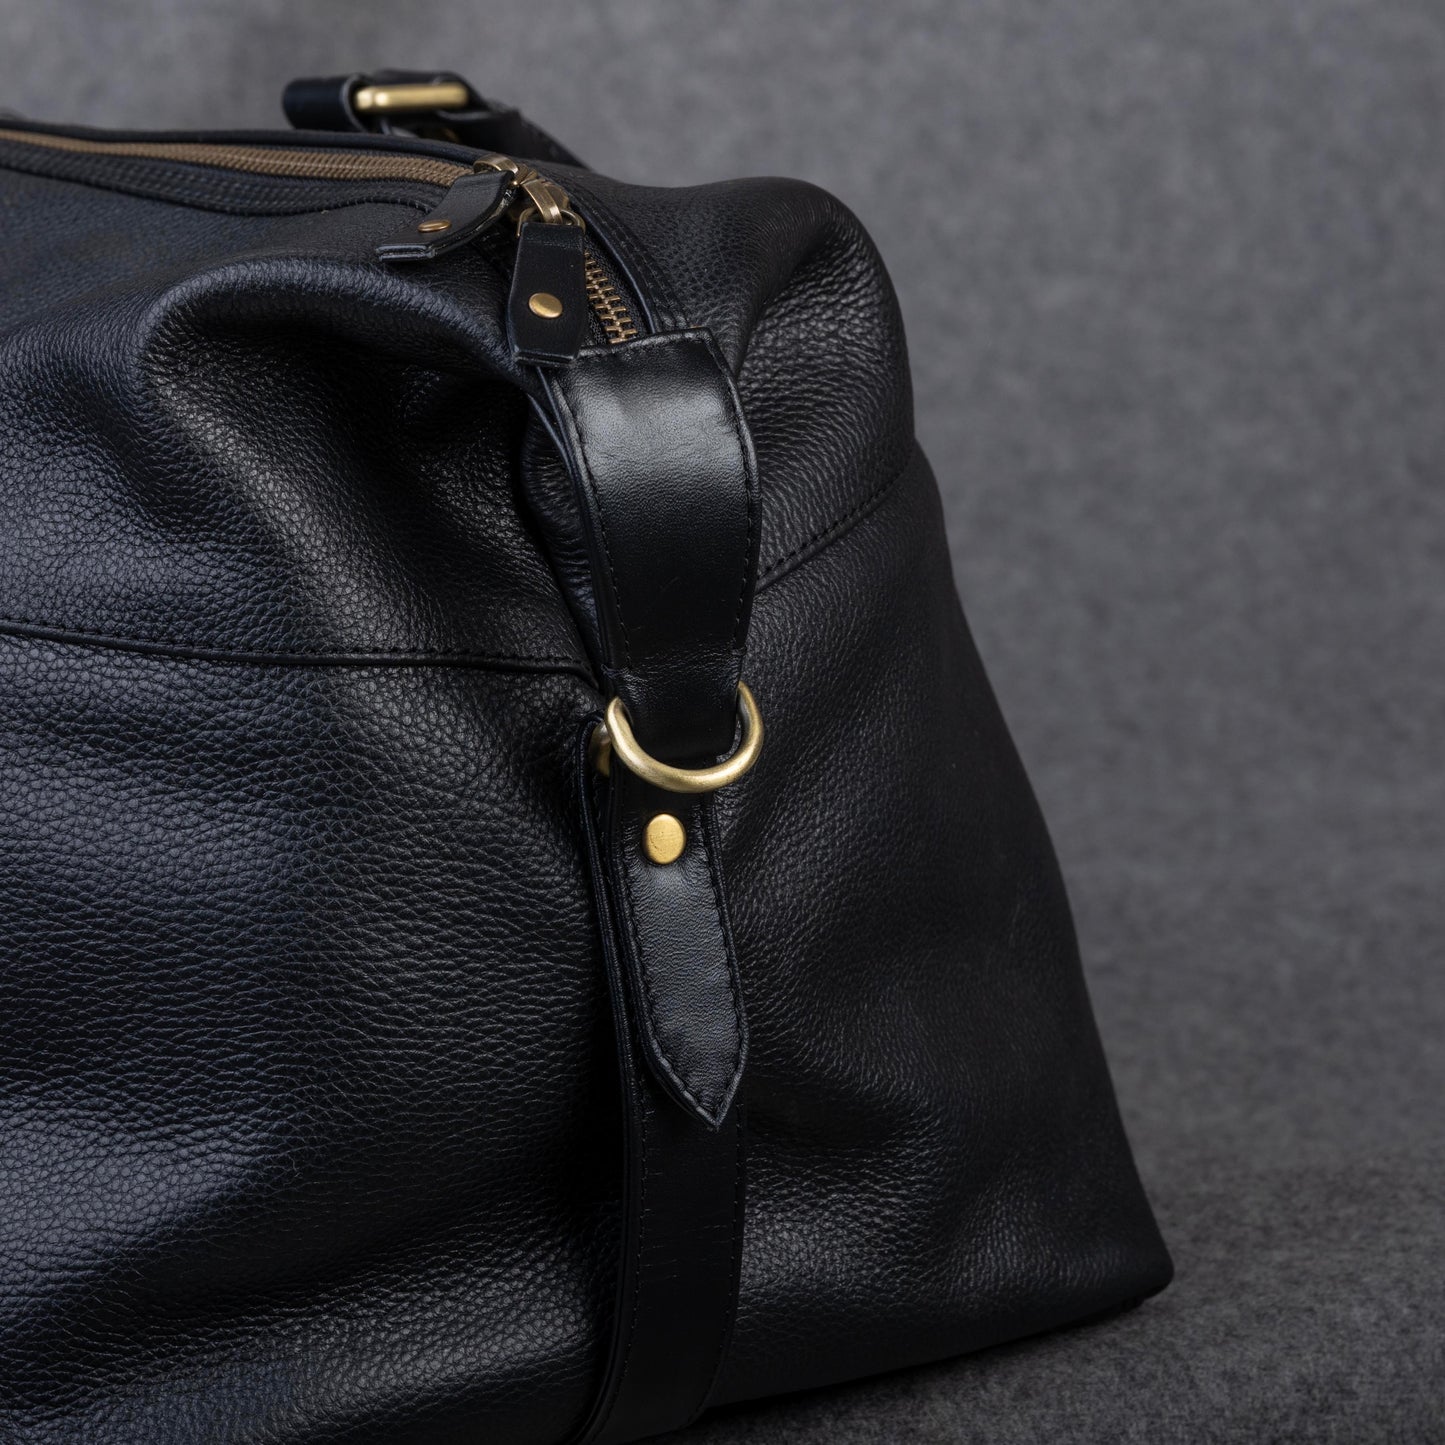 The Duffel Bag is made from Soft Pebble Grain Leather